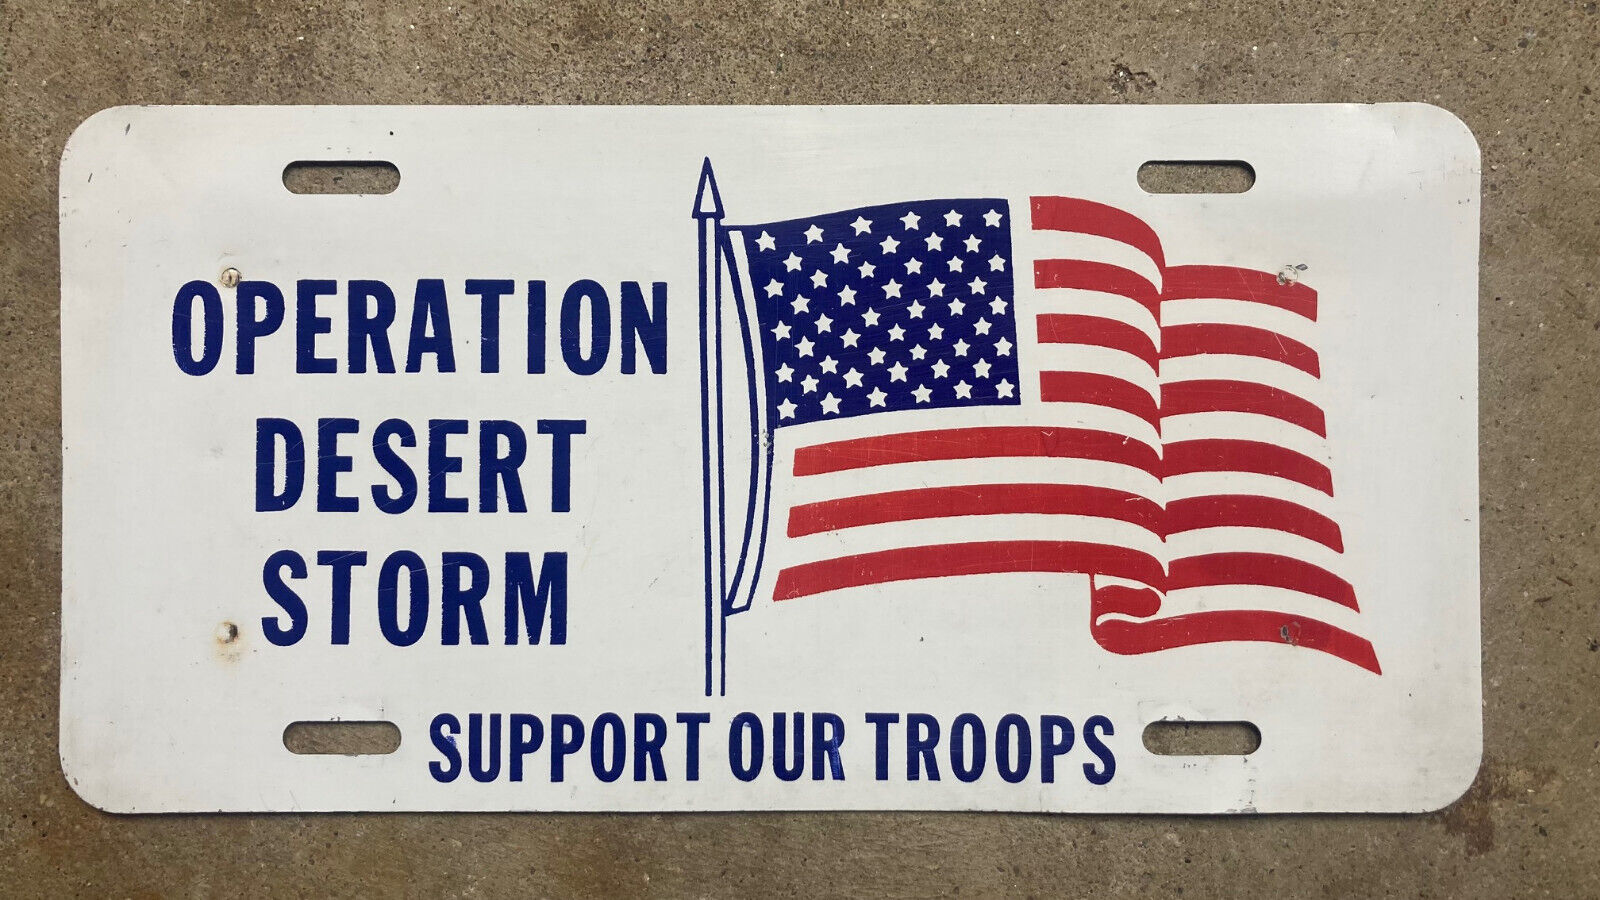 1991 Operation Desert Storm booster license plate USA flag support our troops